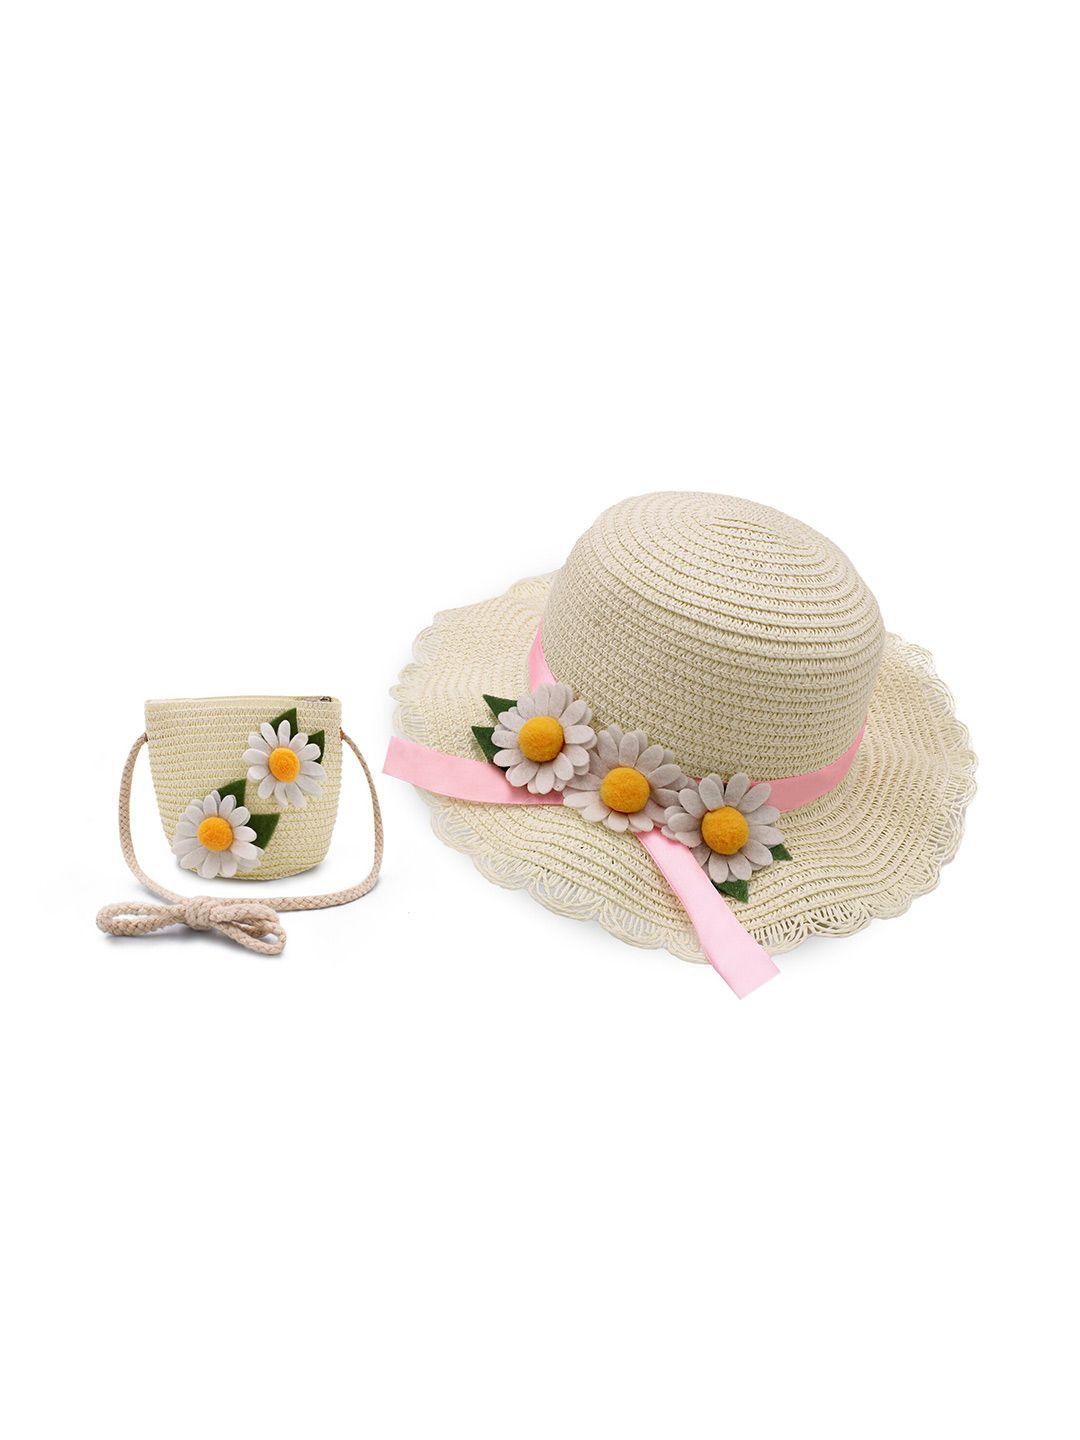 jenna floral embellished sun hat with pouch